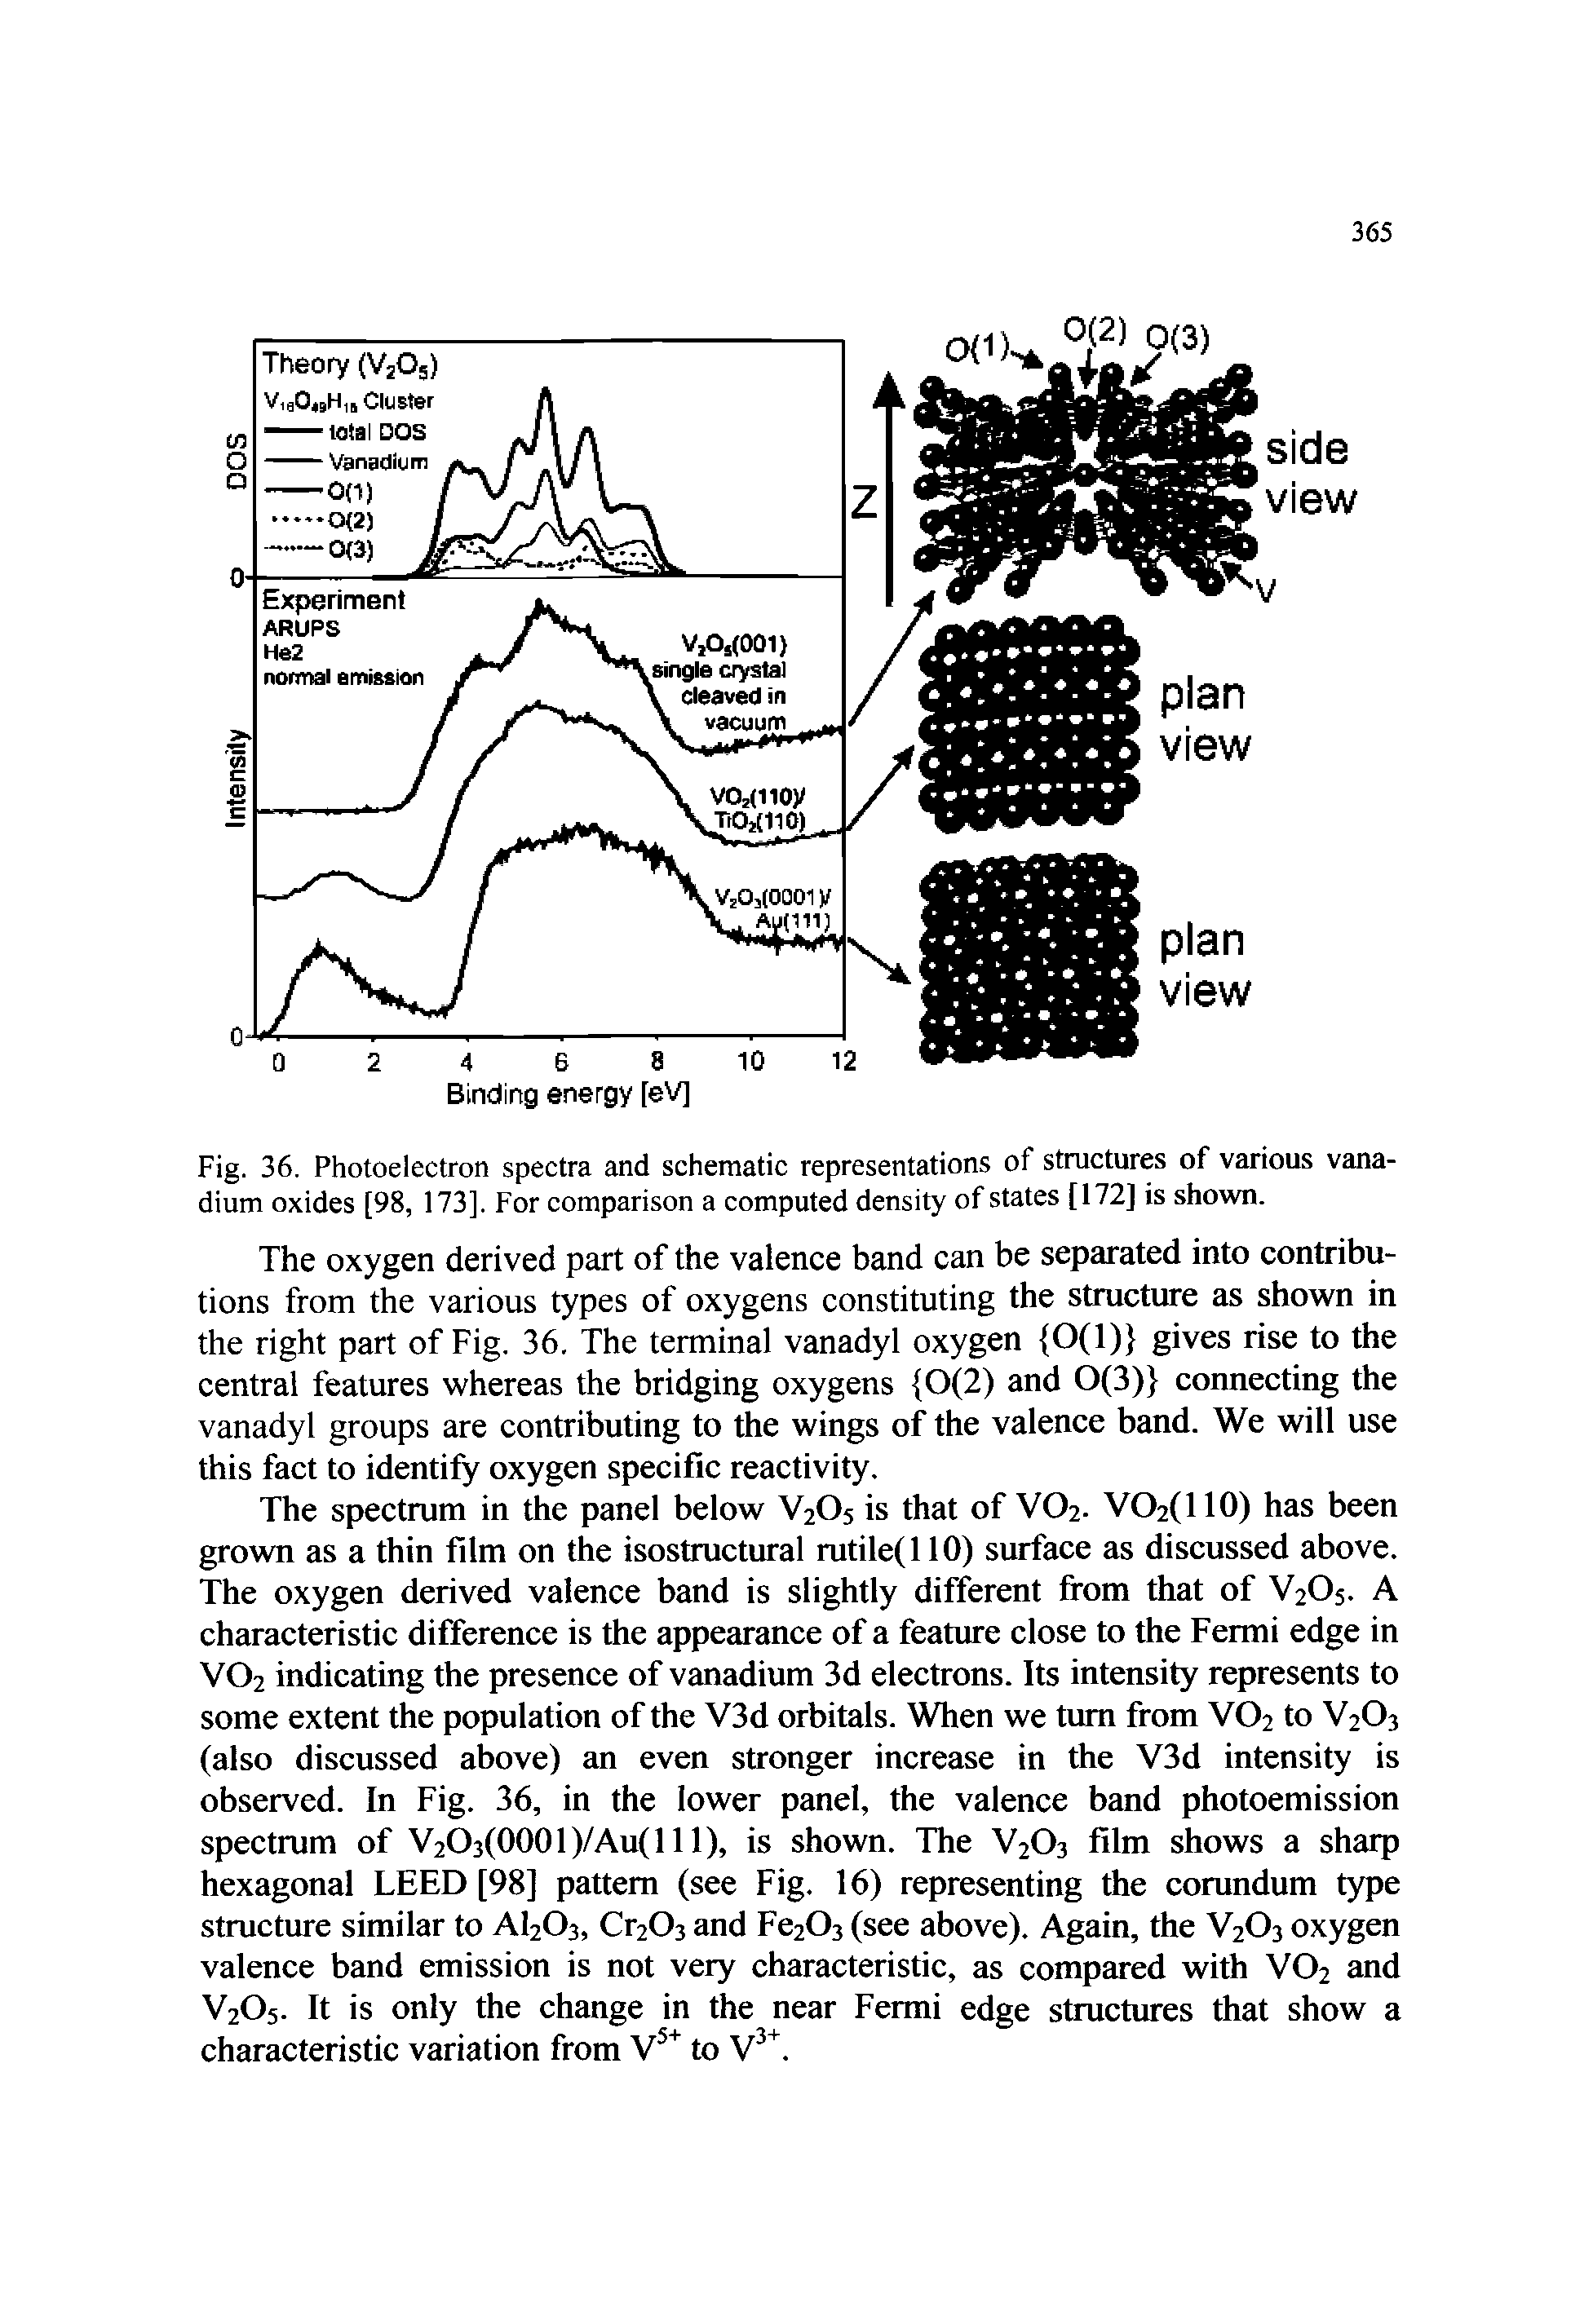 Fig. 36. Photoelectron spectra and schematic representations of structures of various vanadium oxides [98, 173]. For comparison a computed density of states [172] is shown.